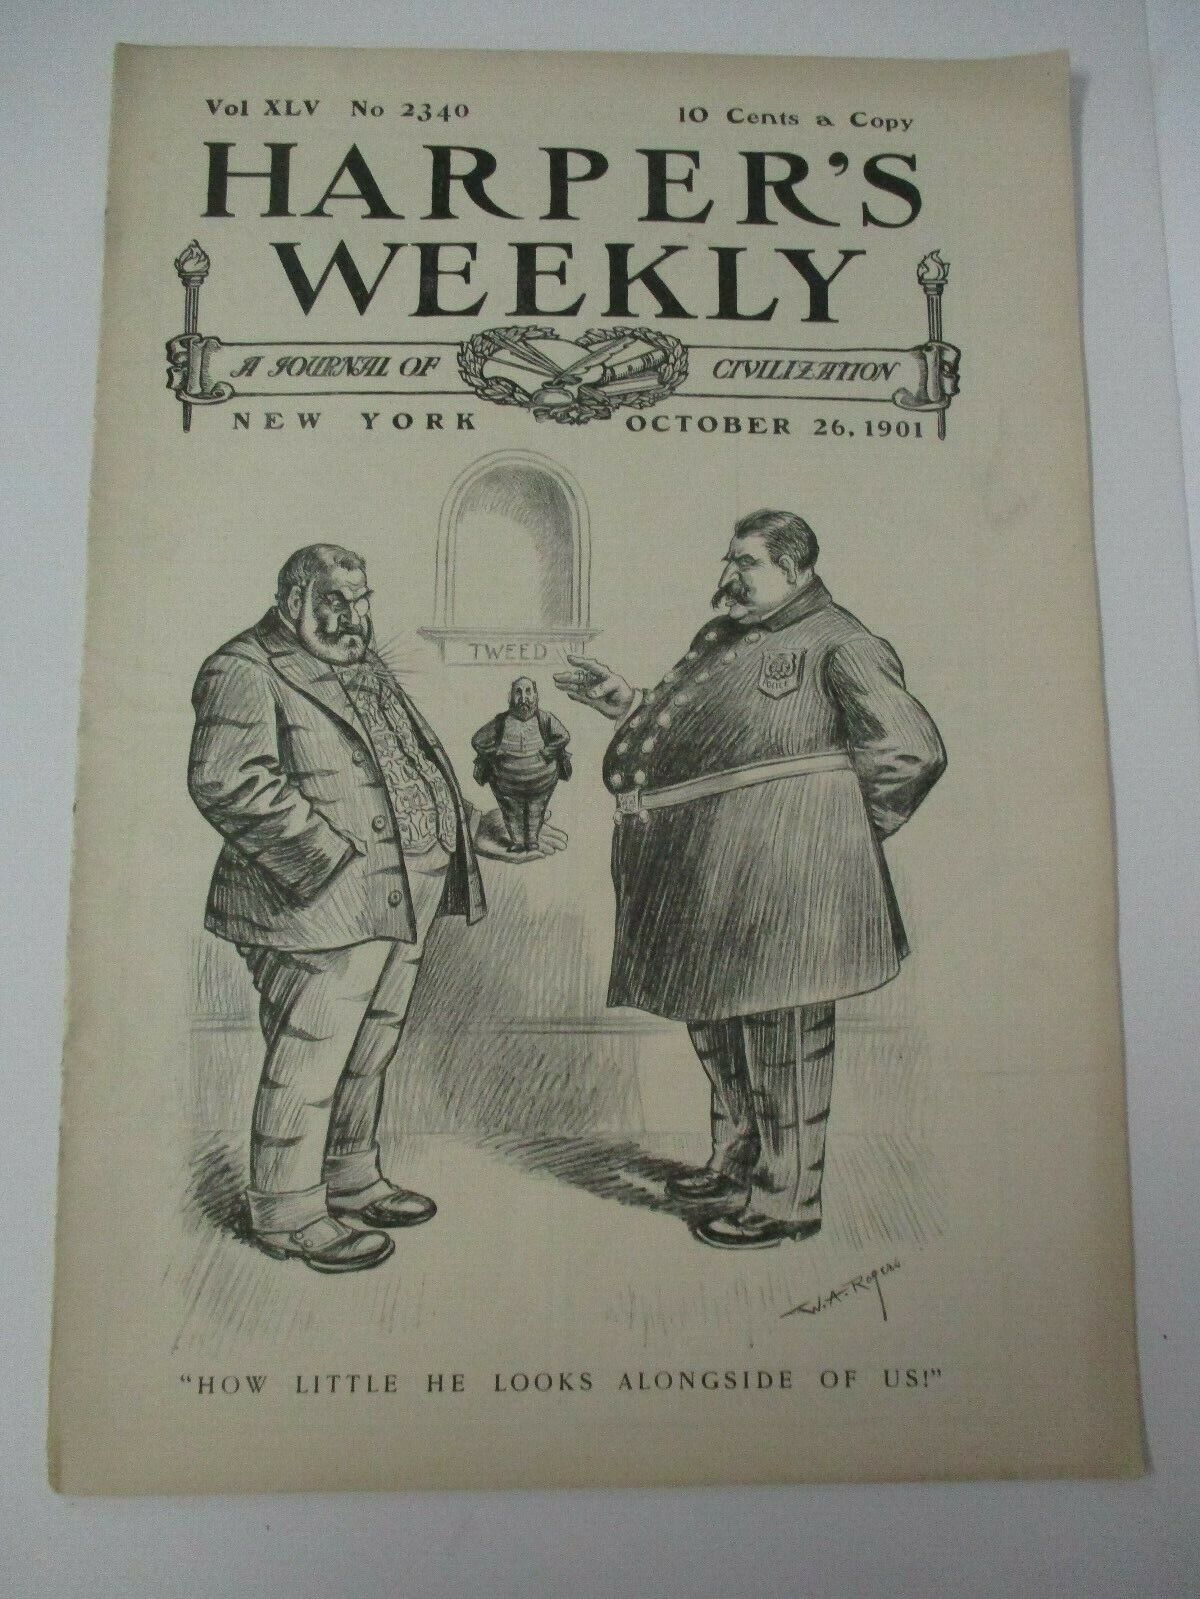 Oct 26, 1901 HARPER\'S WEEKLY; Tammany Hall, Yale Celebration, Sports, Peary etc